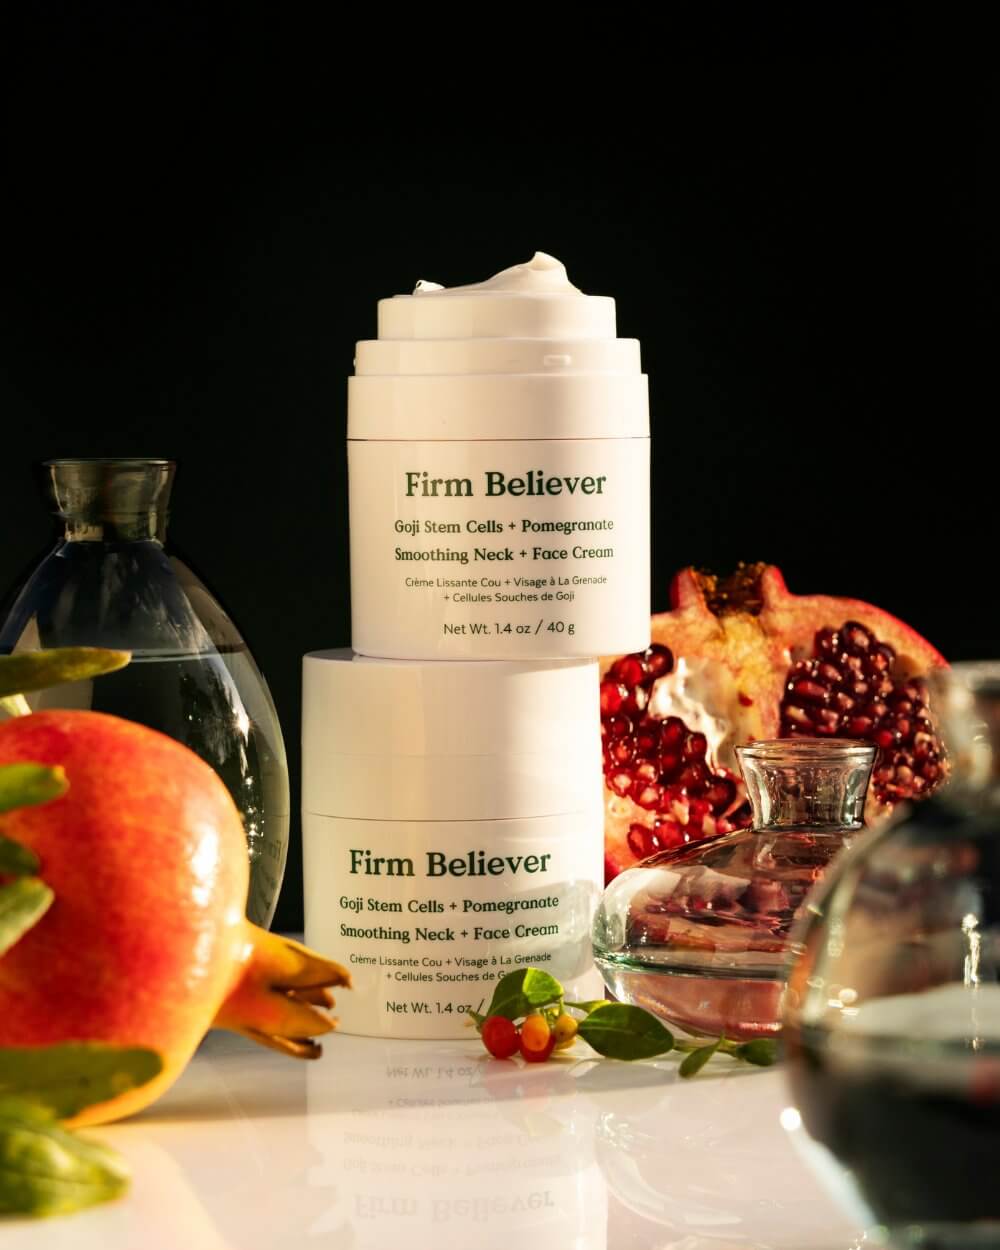 Firm Believer Goji Stem Cell + Pomegranate Smoothing Neck + Face Cream Three Ships CREAMS Natural Vegan Cruelty-free Skincare